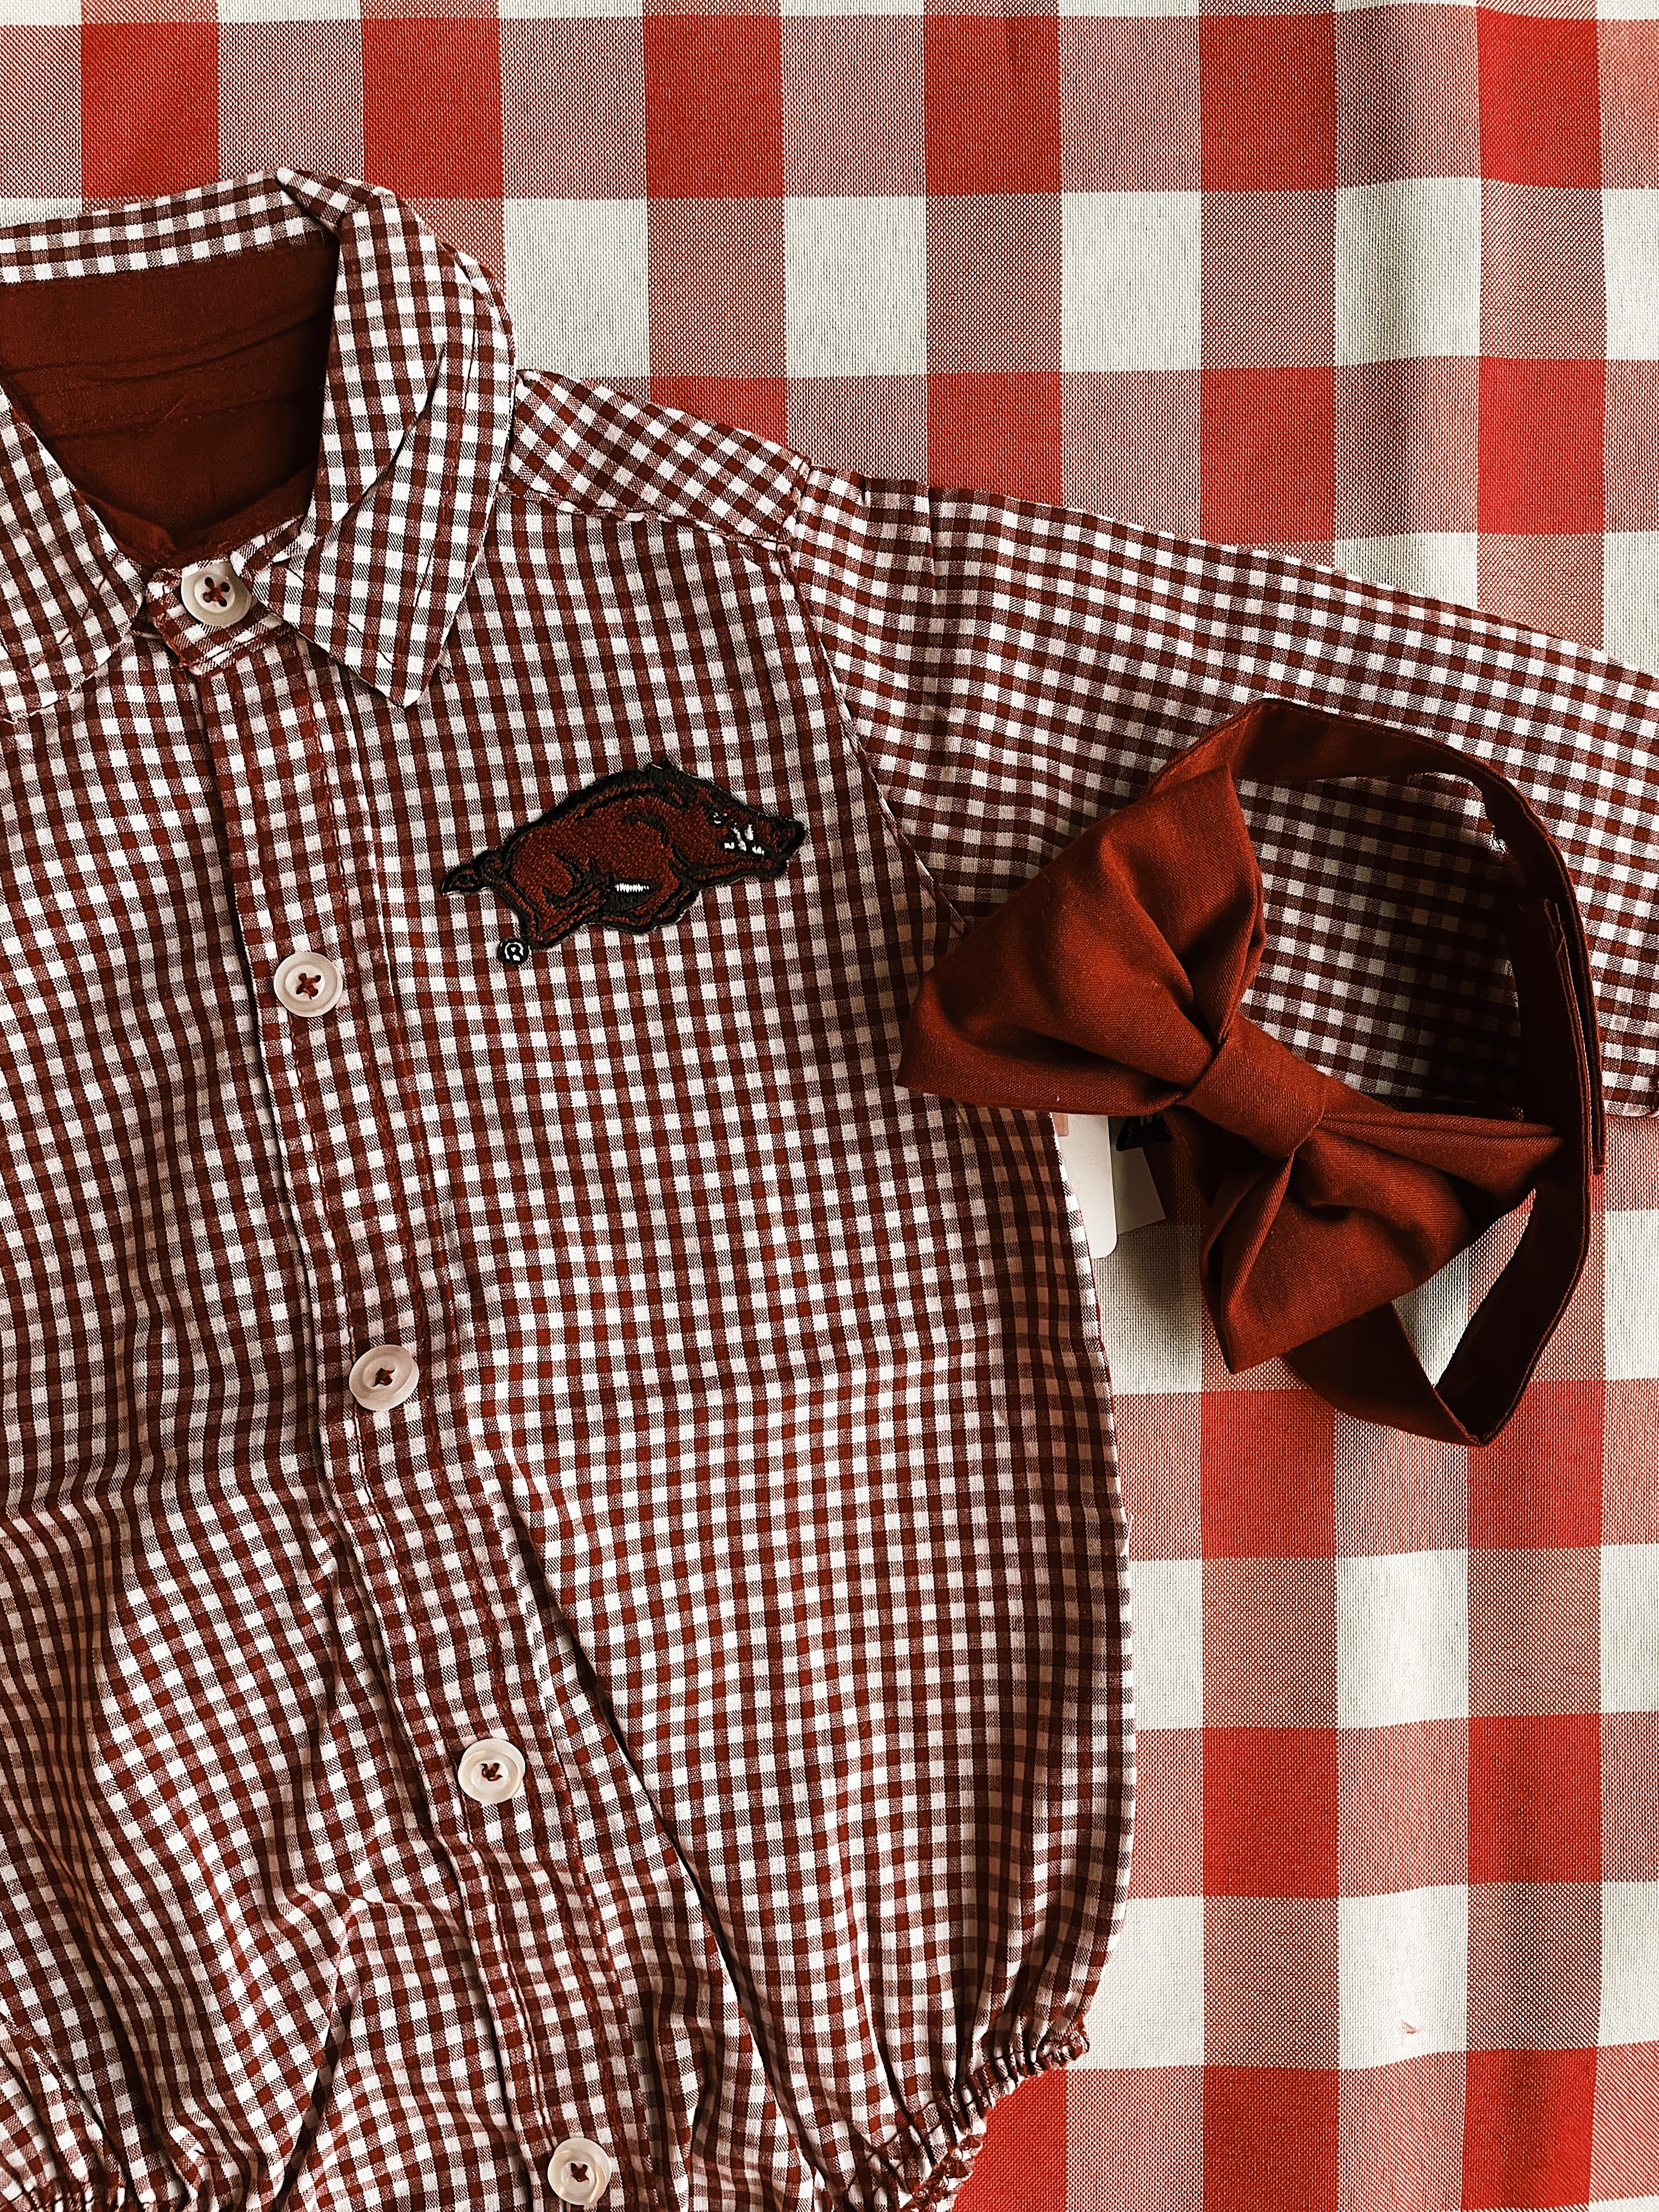 Arkansas Gingham Button-Up Body Suit with Bowtie